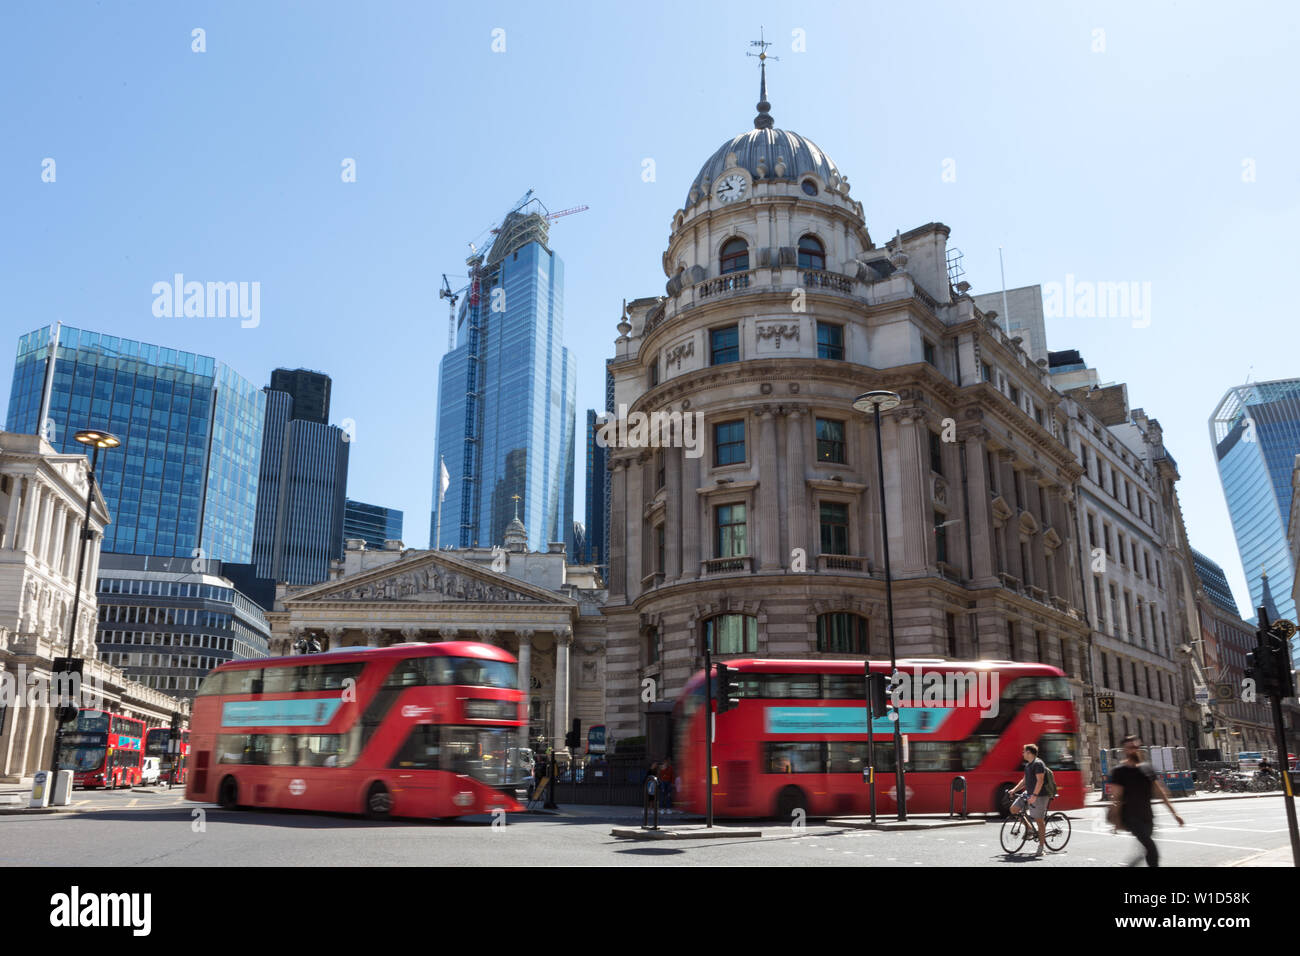 The Bank of England on the left and the Royal Exchange at centre are two of the many significant buildings in the City of London Stock Photo